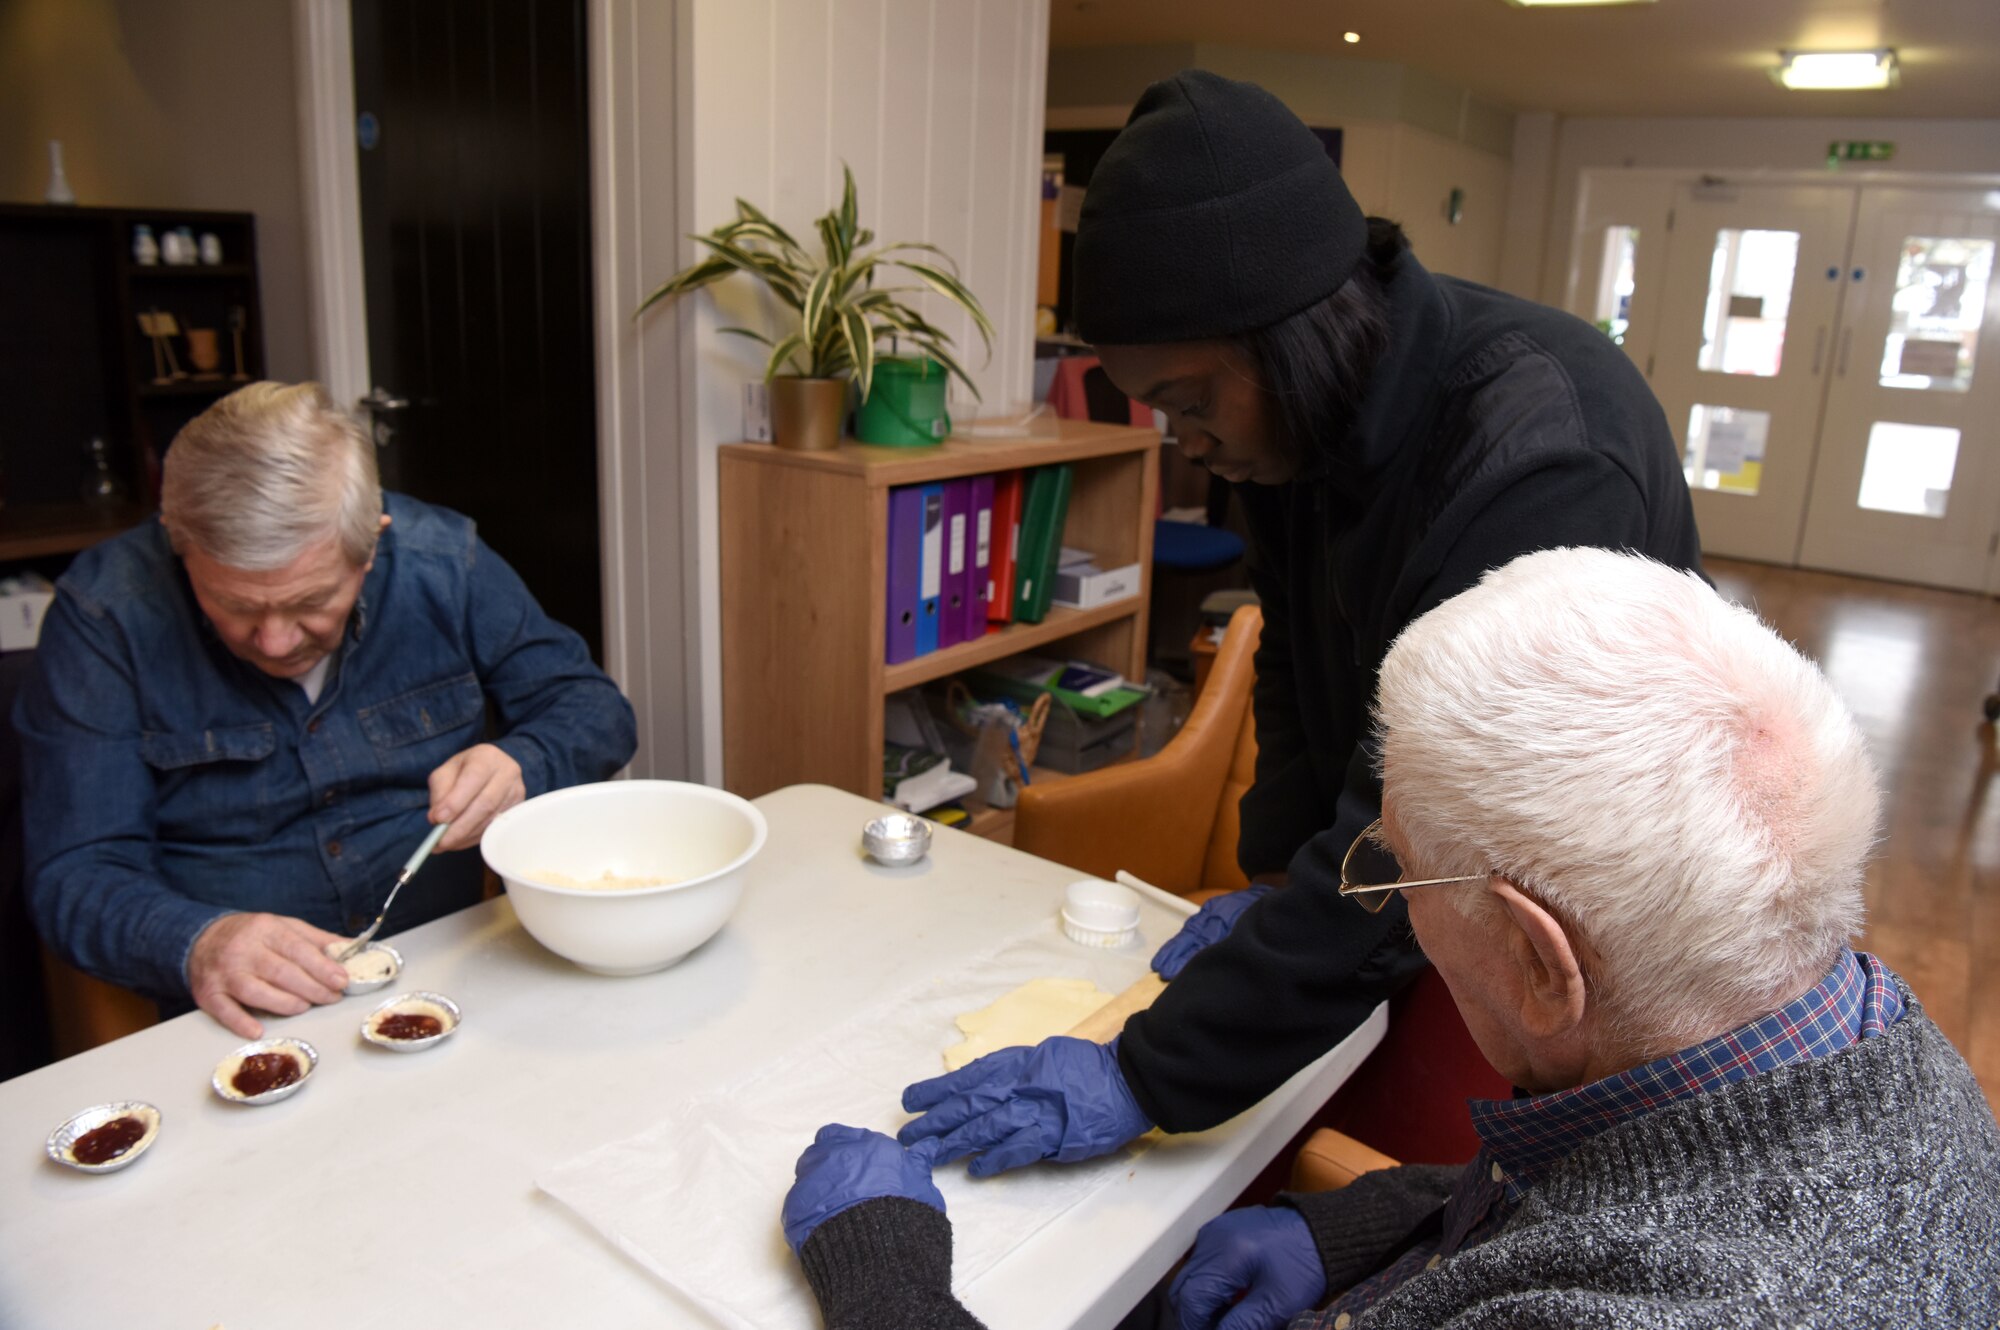 U.S. Air Force Airman 1st Class Anija Fitzpatrick-Shaw, center, 100th Logistics Readiness Squadron, helps Mildenhall Lodge Care Home residents Richard, left, and Oscar, make apple and blackberry pies at Mildenhall Lodge Care Home, Mildenhall, England, March 9, 2023. Team Mildenhall Airmen volunteered at the care home, tidying the garden, planting spring flowers and making apple and blackberry pies with the residents. (U.S. Air Force photo by Karen Abeyasekere)